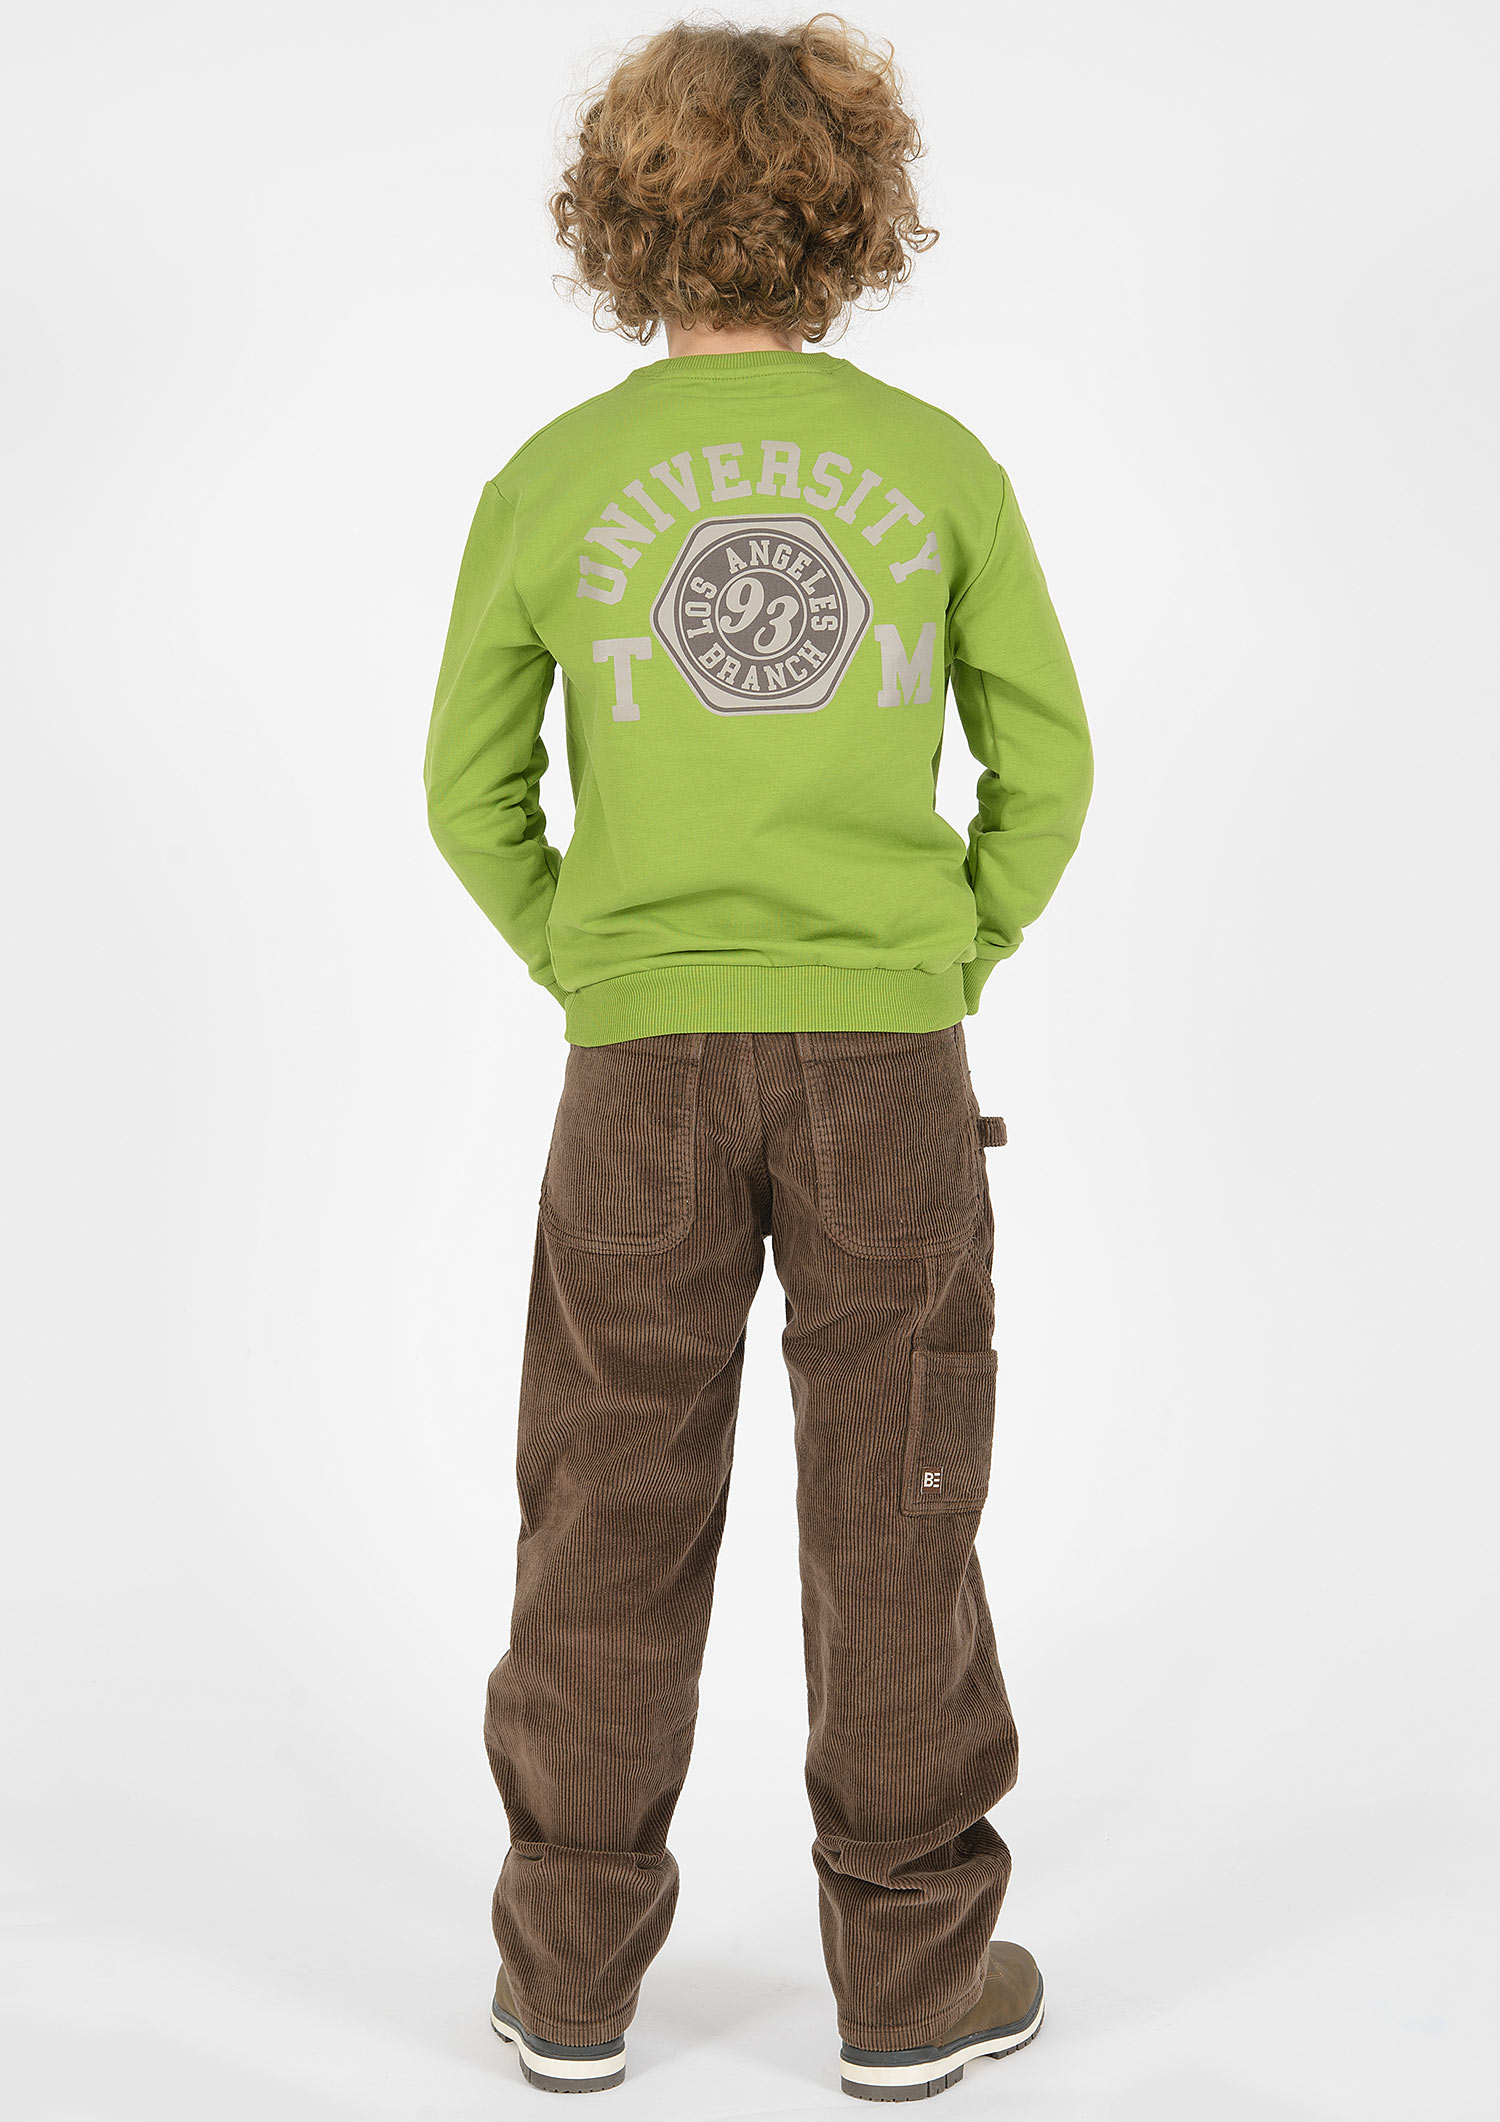 2859-Boys Worker Baggy Pant Corduroy, available in Normal